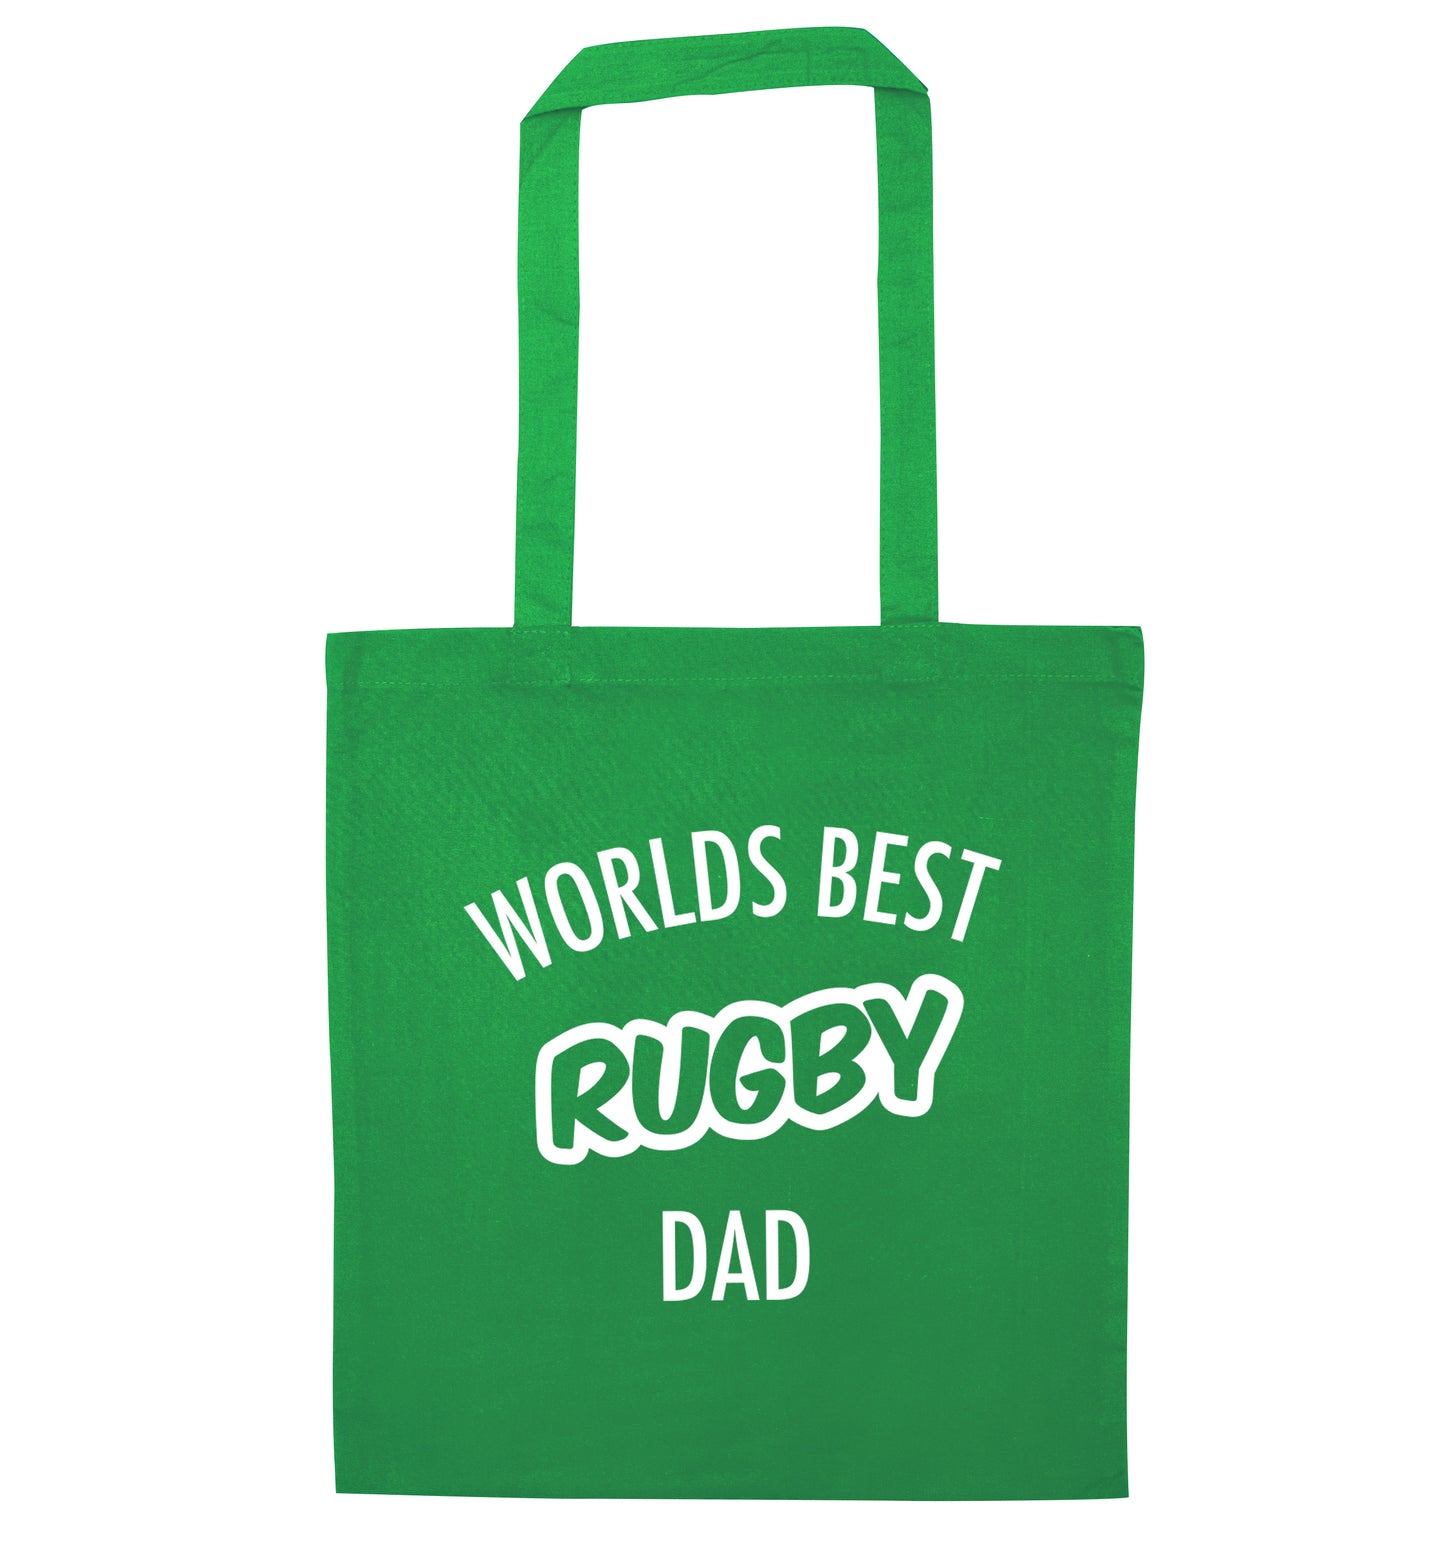 Worlds best rugby dad green tote bag